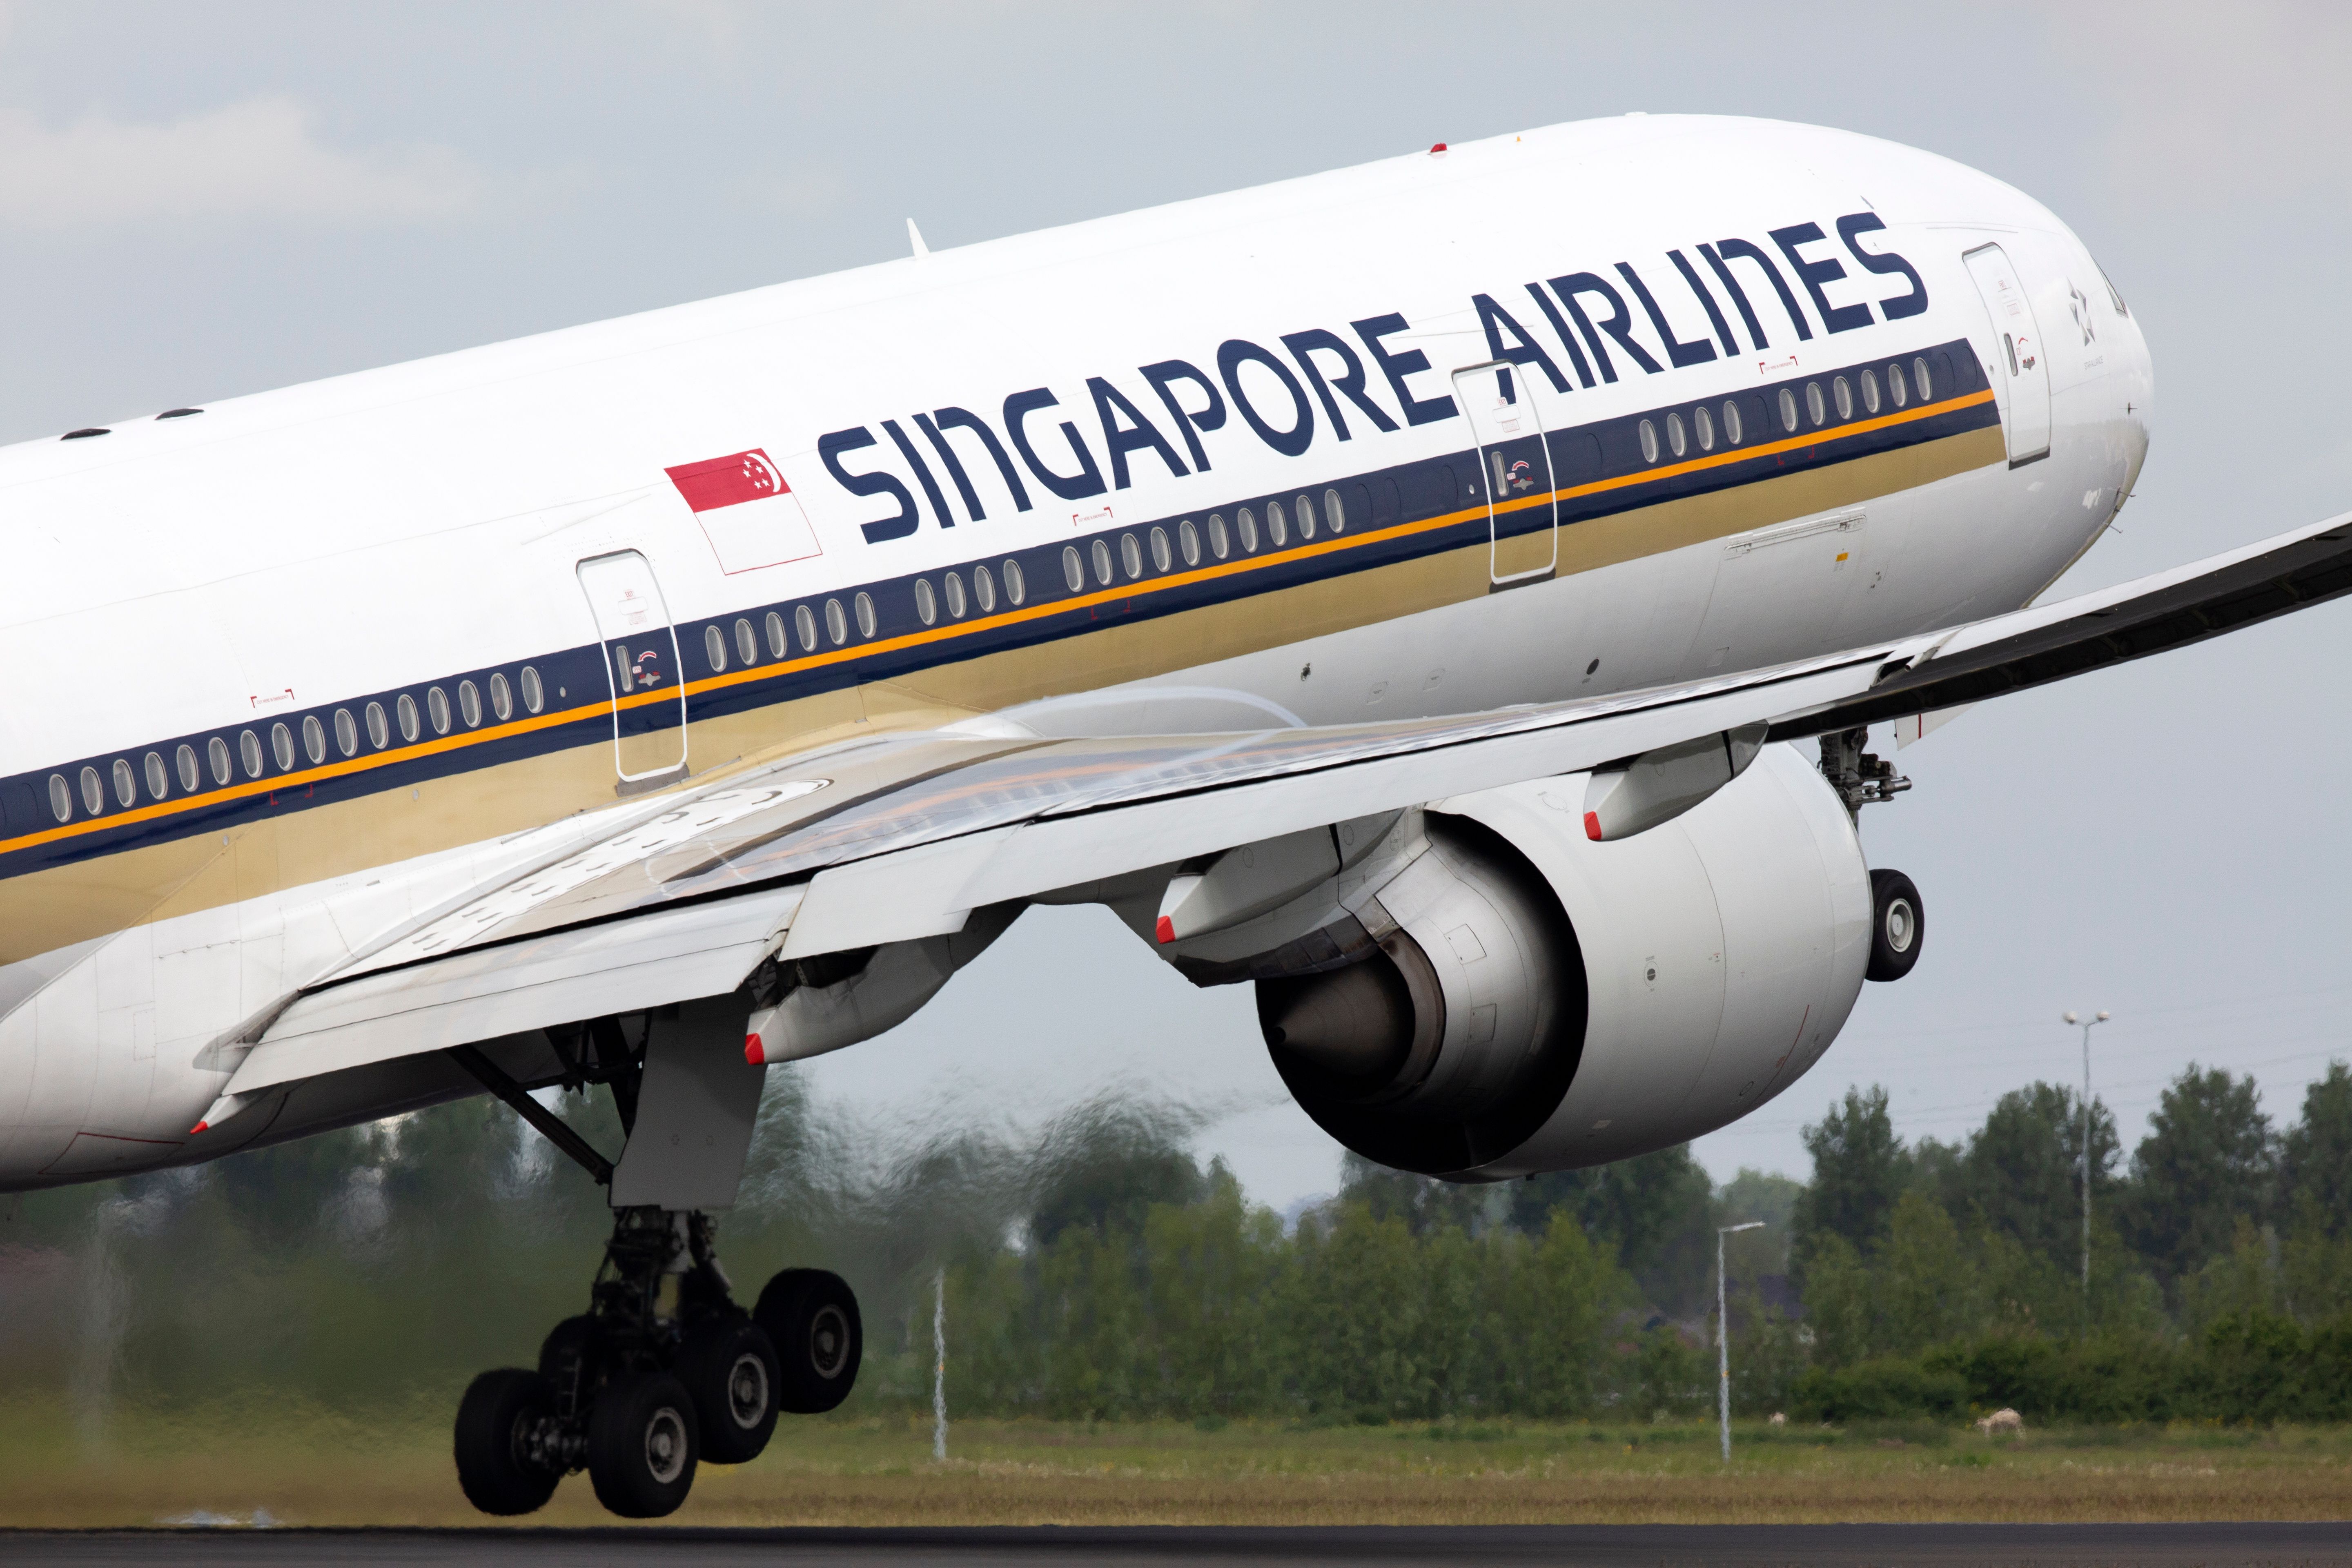 Singapore Airlines Boeing 777-300ER taking off